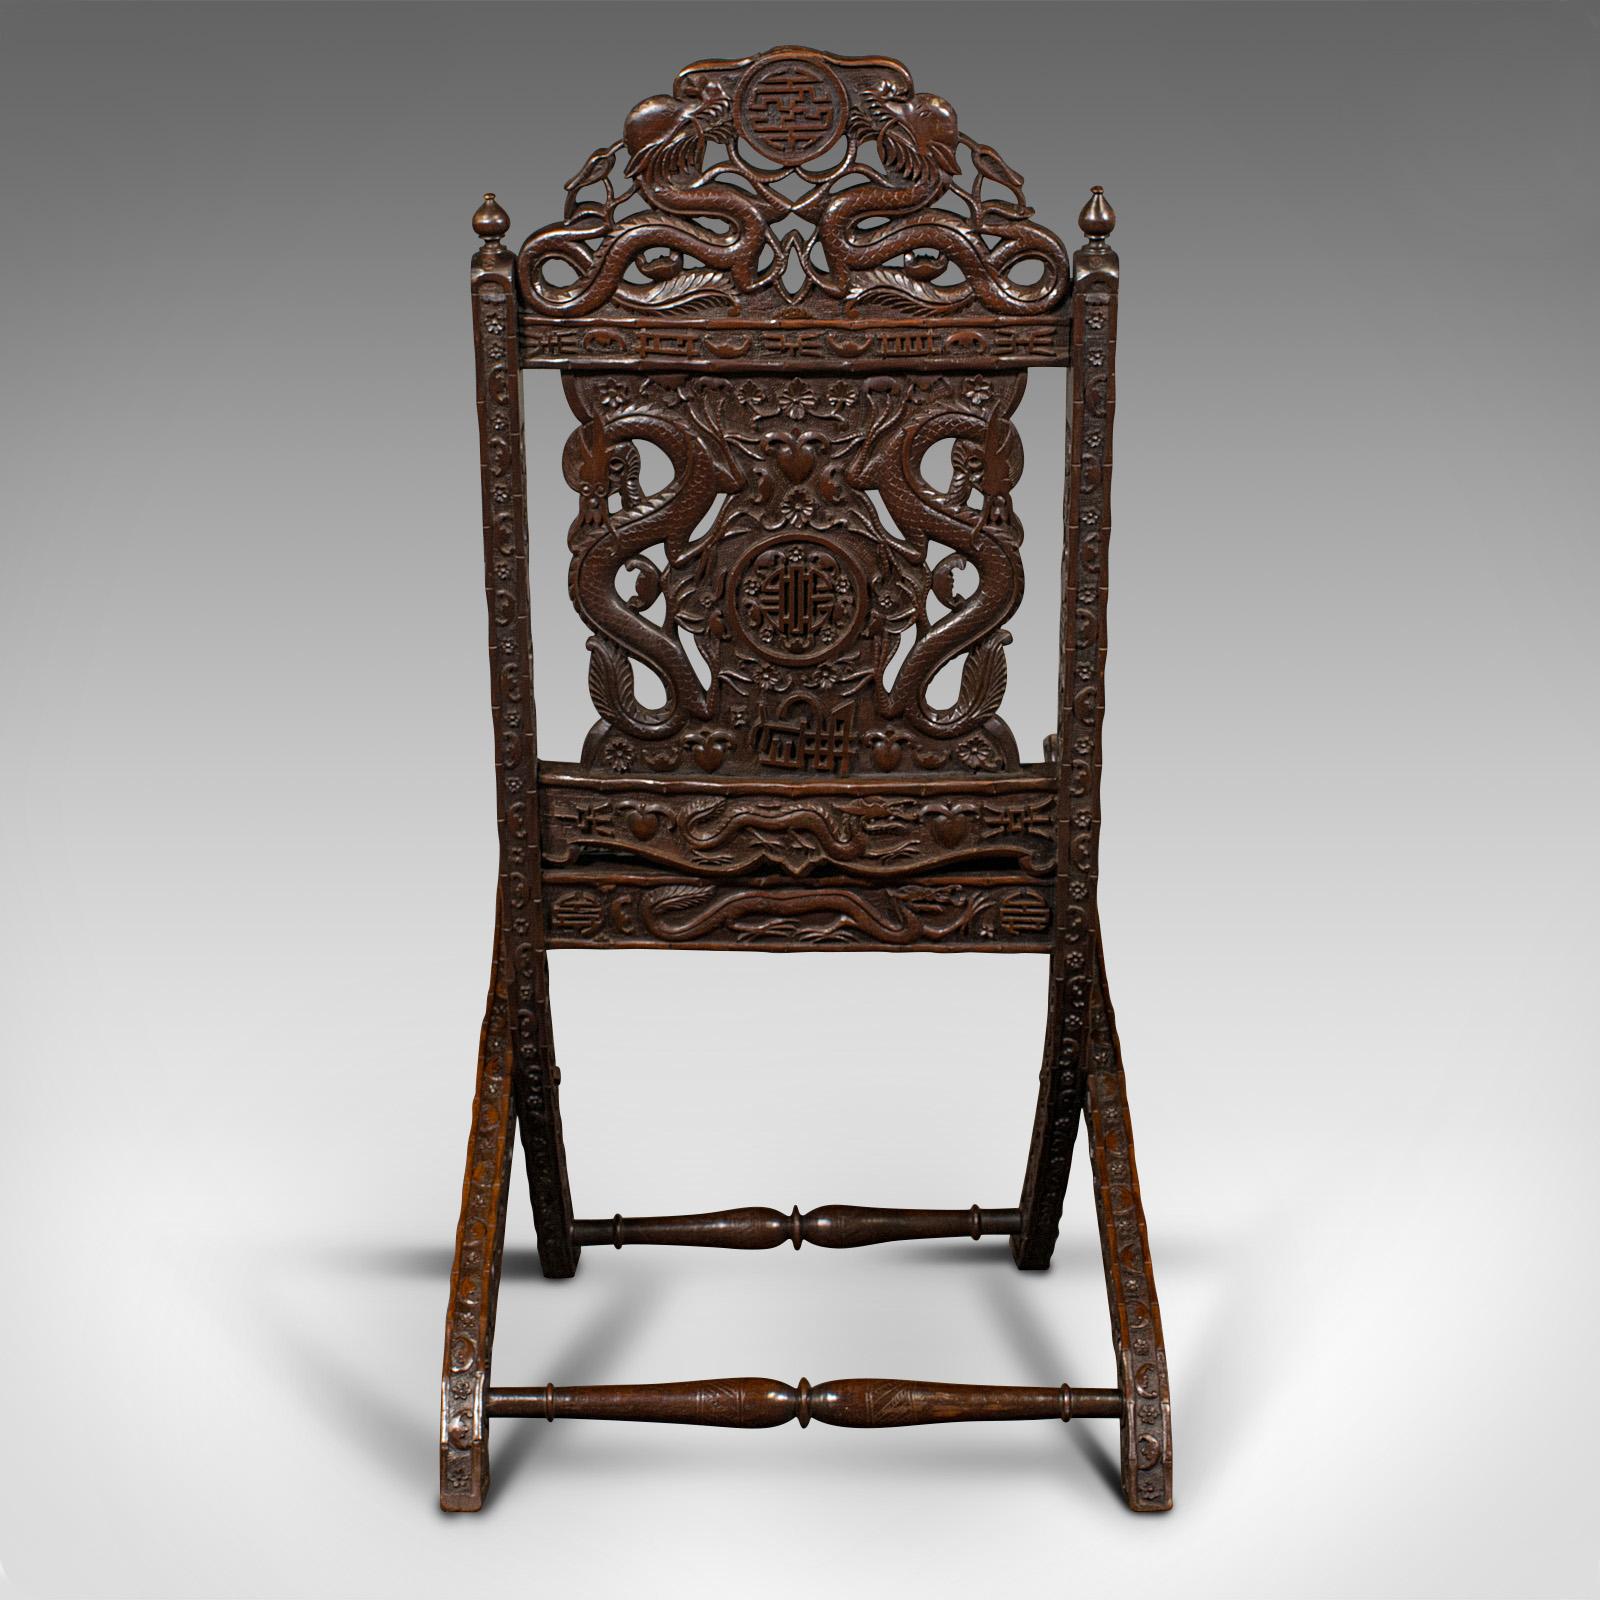 Wood Antique Campaign Chair, Chinese, Carved, Folding Colonial Seat, Victorian, 1850